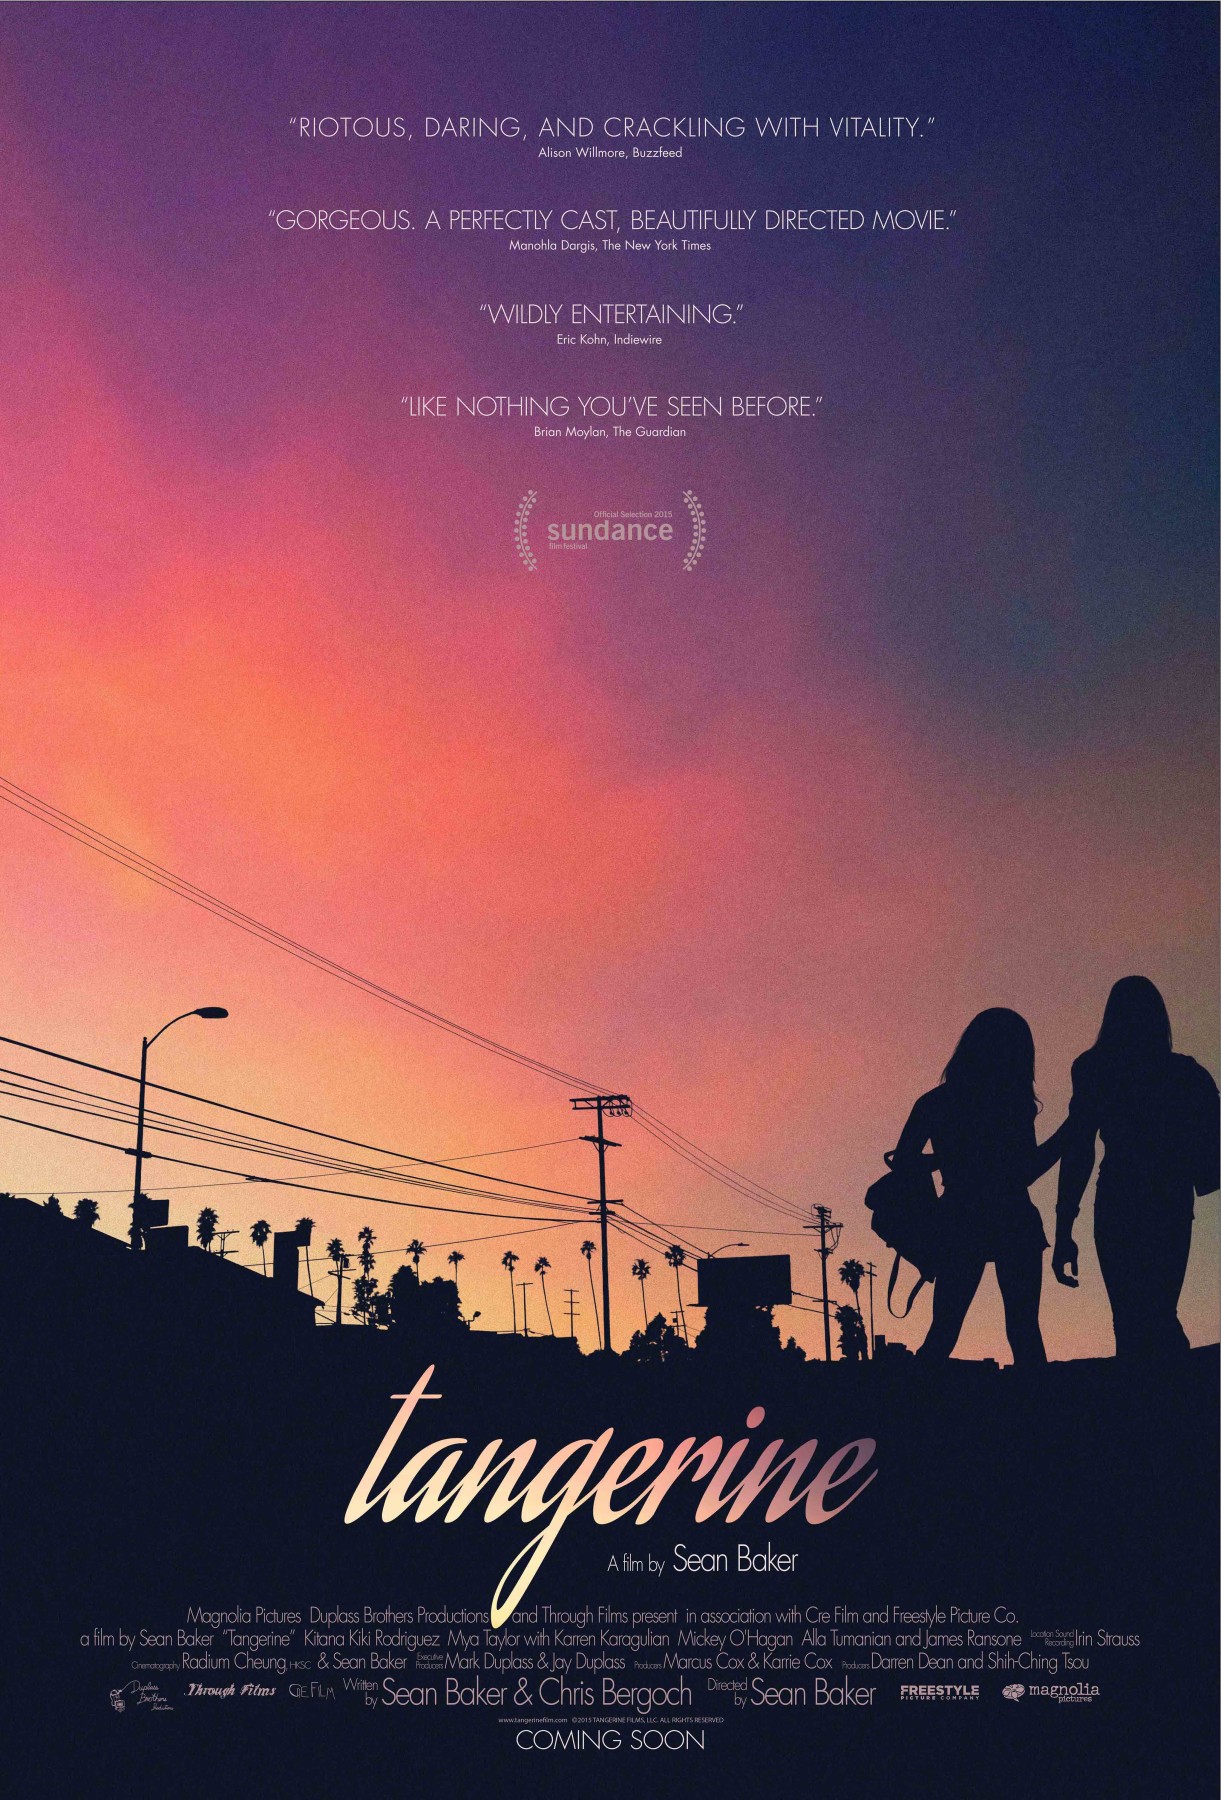 The 2015 feature film Tangerine was shot with an iPhone 5.